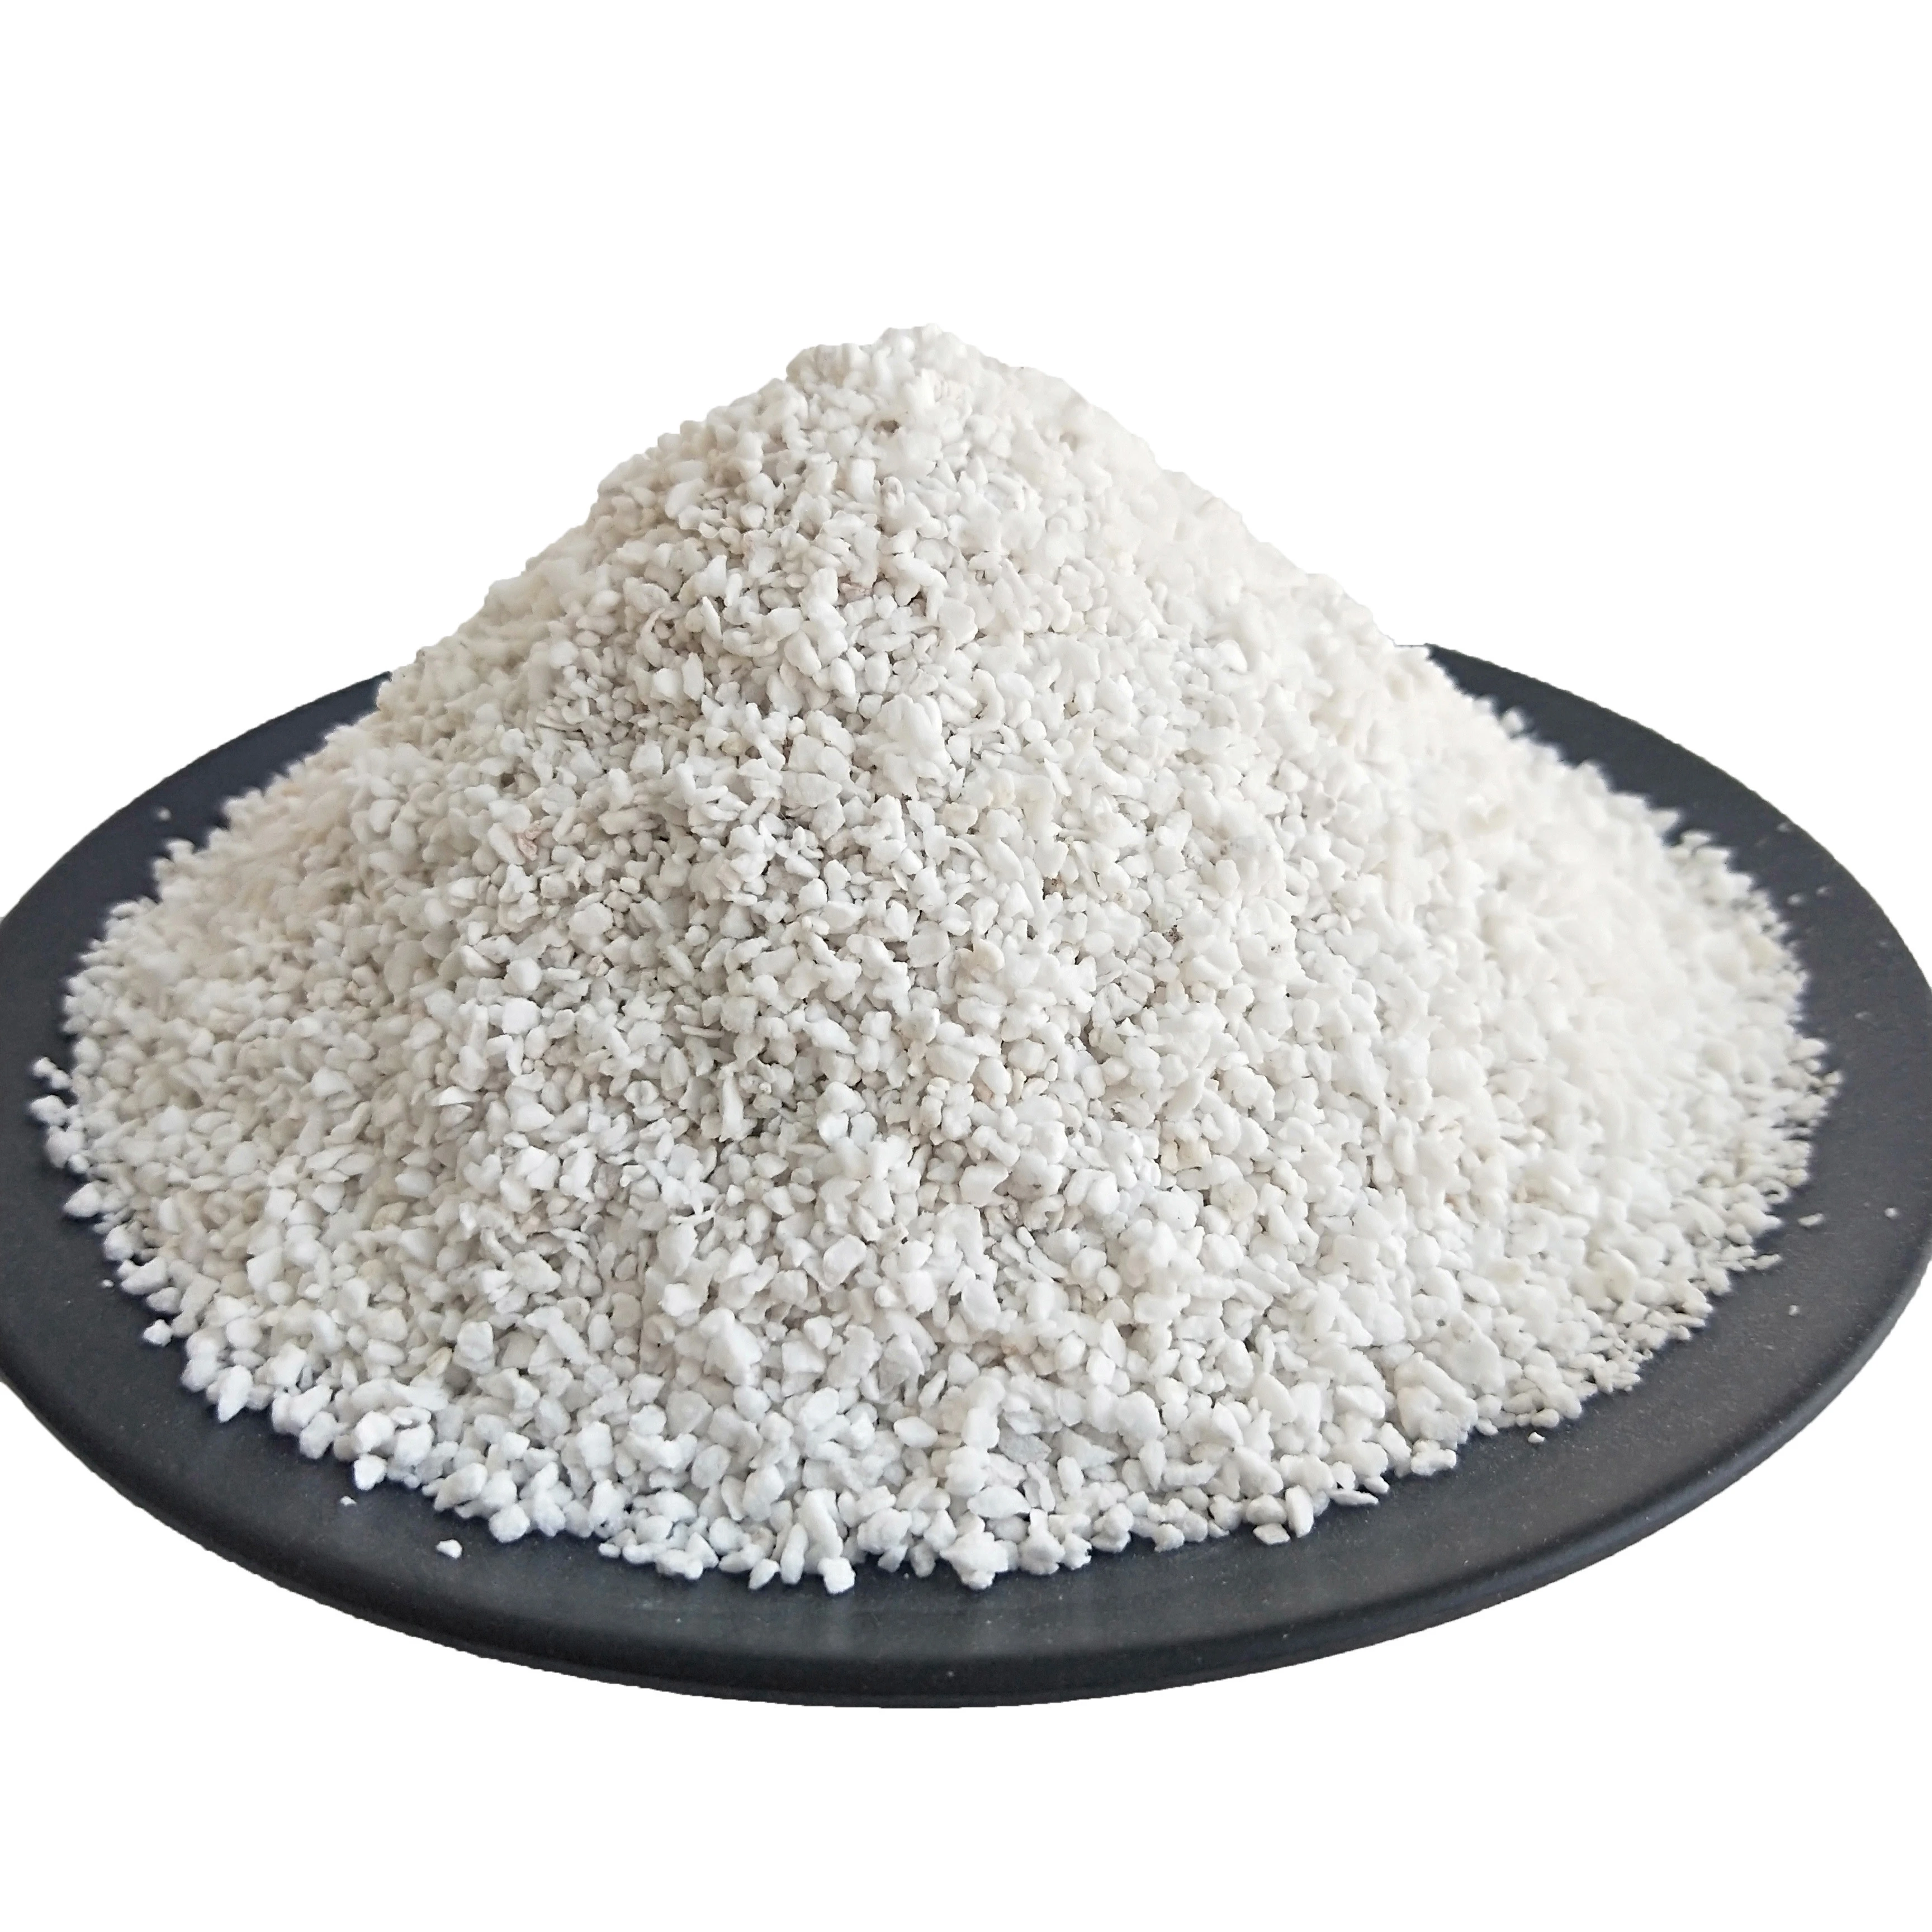 Expanded  perlite for insulation